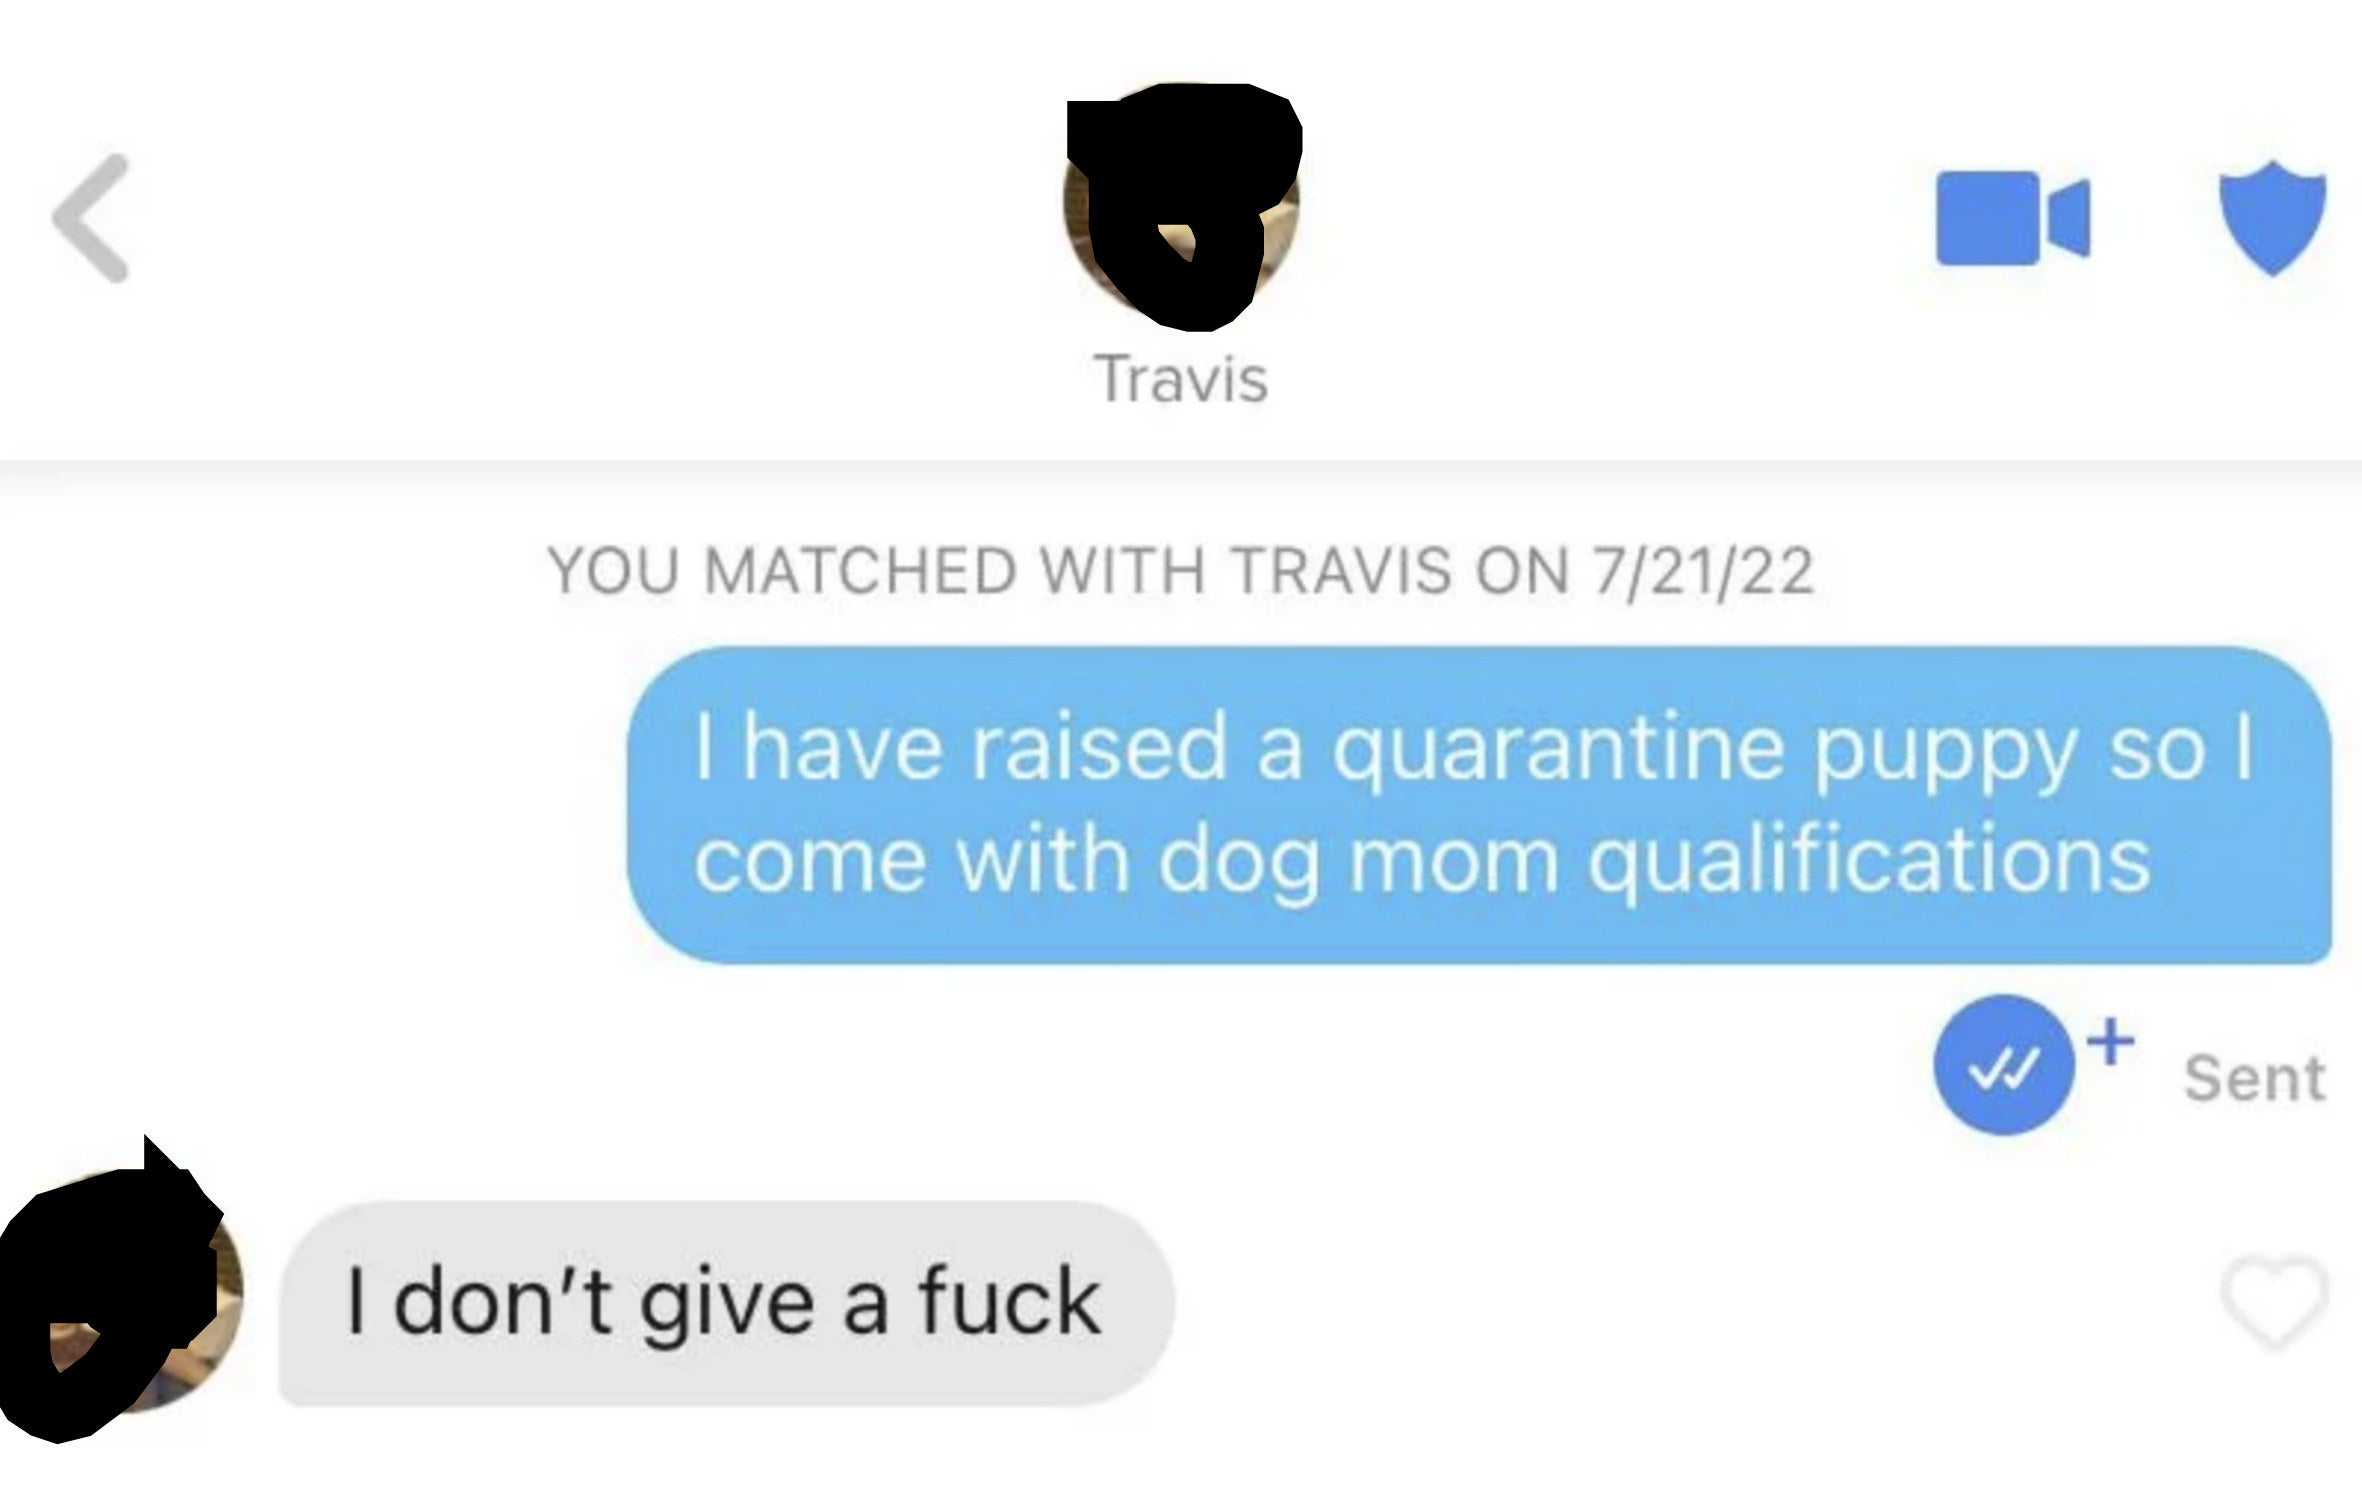 A woman opens conversation with Travis by saying &quot;I raised a quarantine puppy so I come with dog mom qualifications,&quot; and he responds &quot;I don&#x27;t give a fuck&quot;